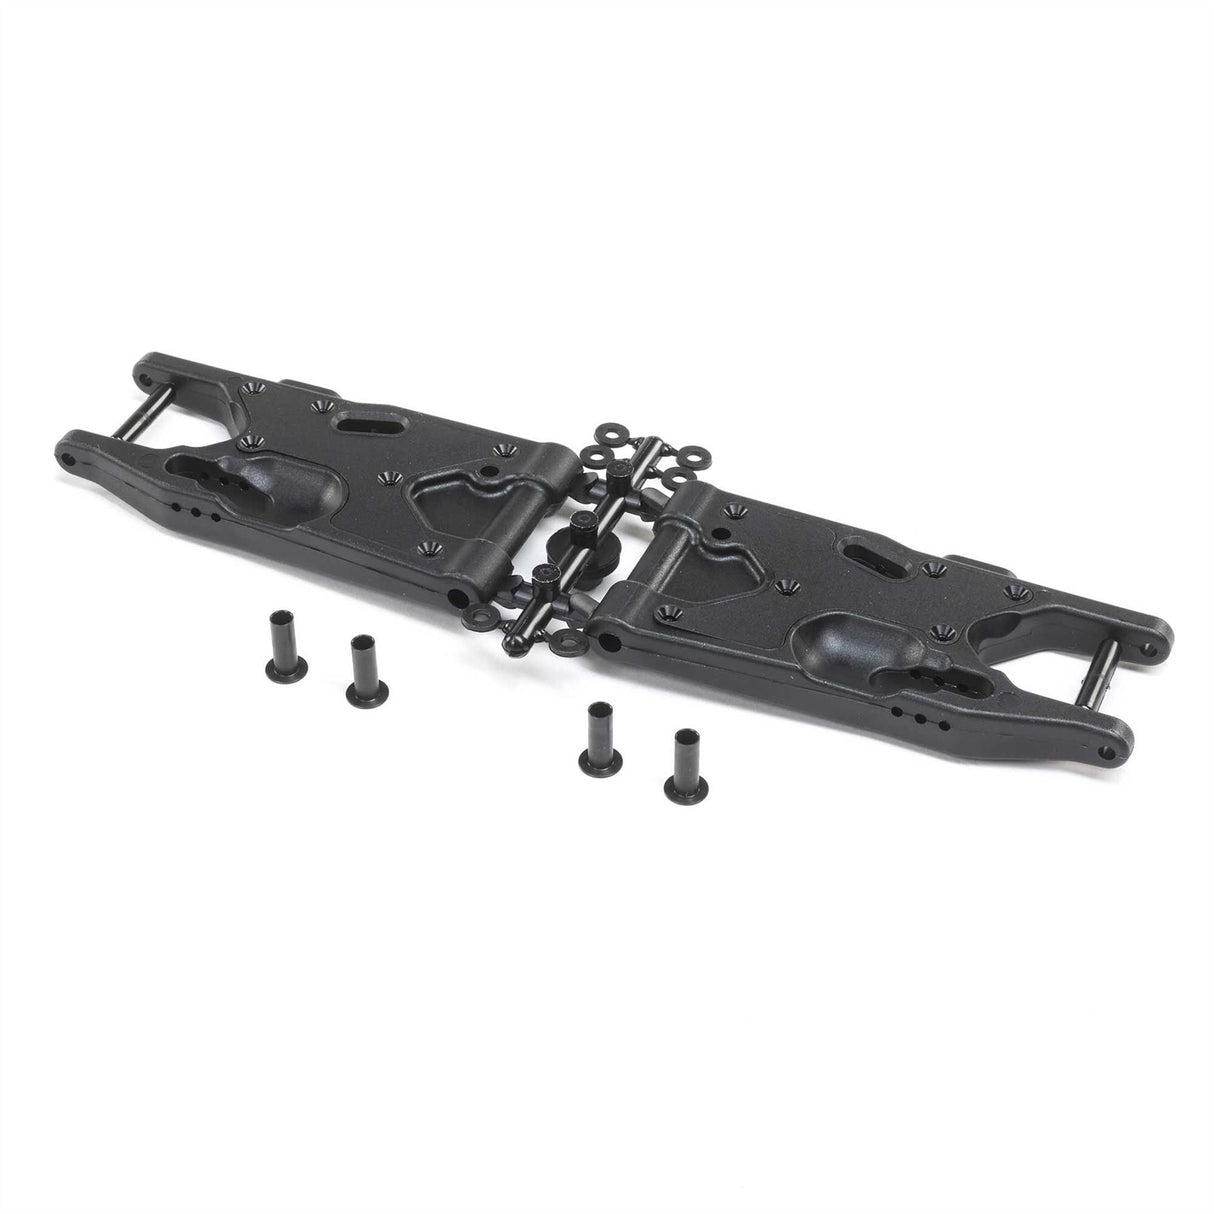 TLR Rear Arm Set with Inserts: 8X, 8XE 2.0